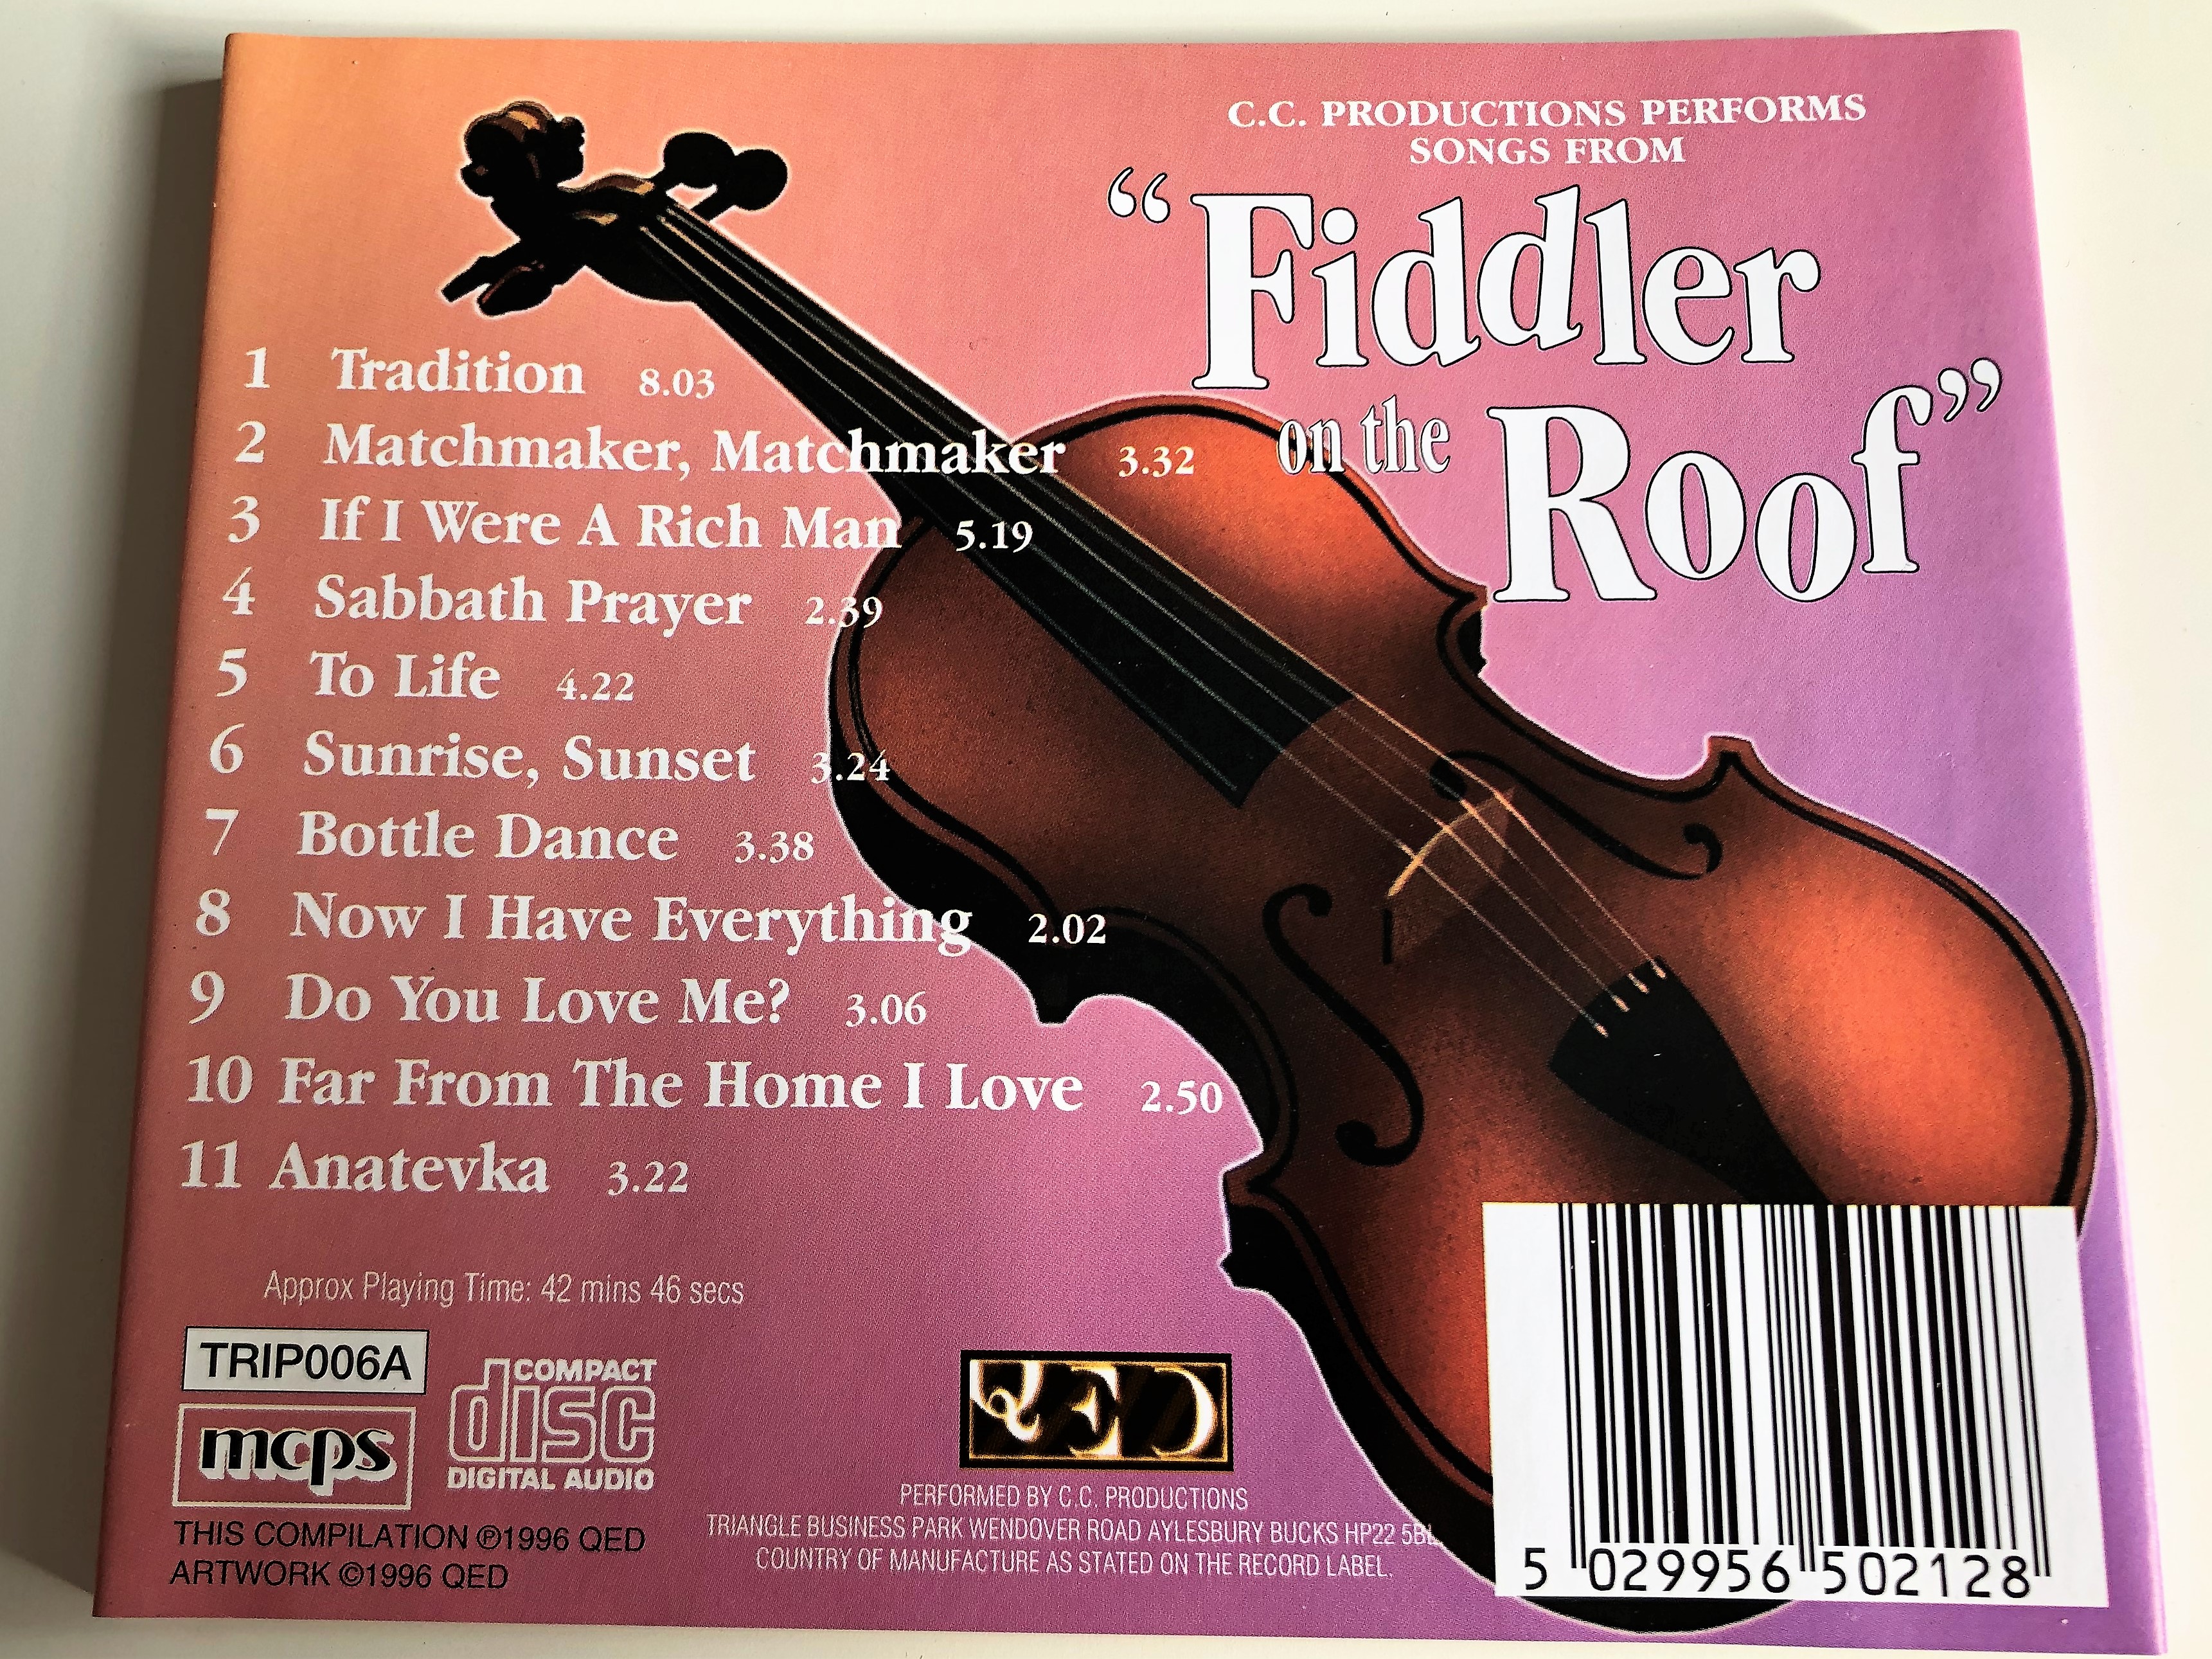 c.c-productions-performs-songs-from-fiddler-on-the-roof-audio-cd-1996-tradition-matchmaker-matchmaker-if-i-were-a-rich-man-sunrise-sunset-trip006a-qed-2-.jpg